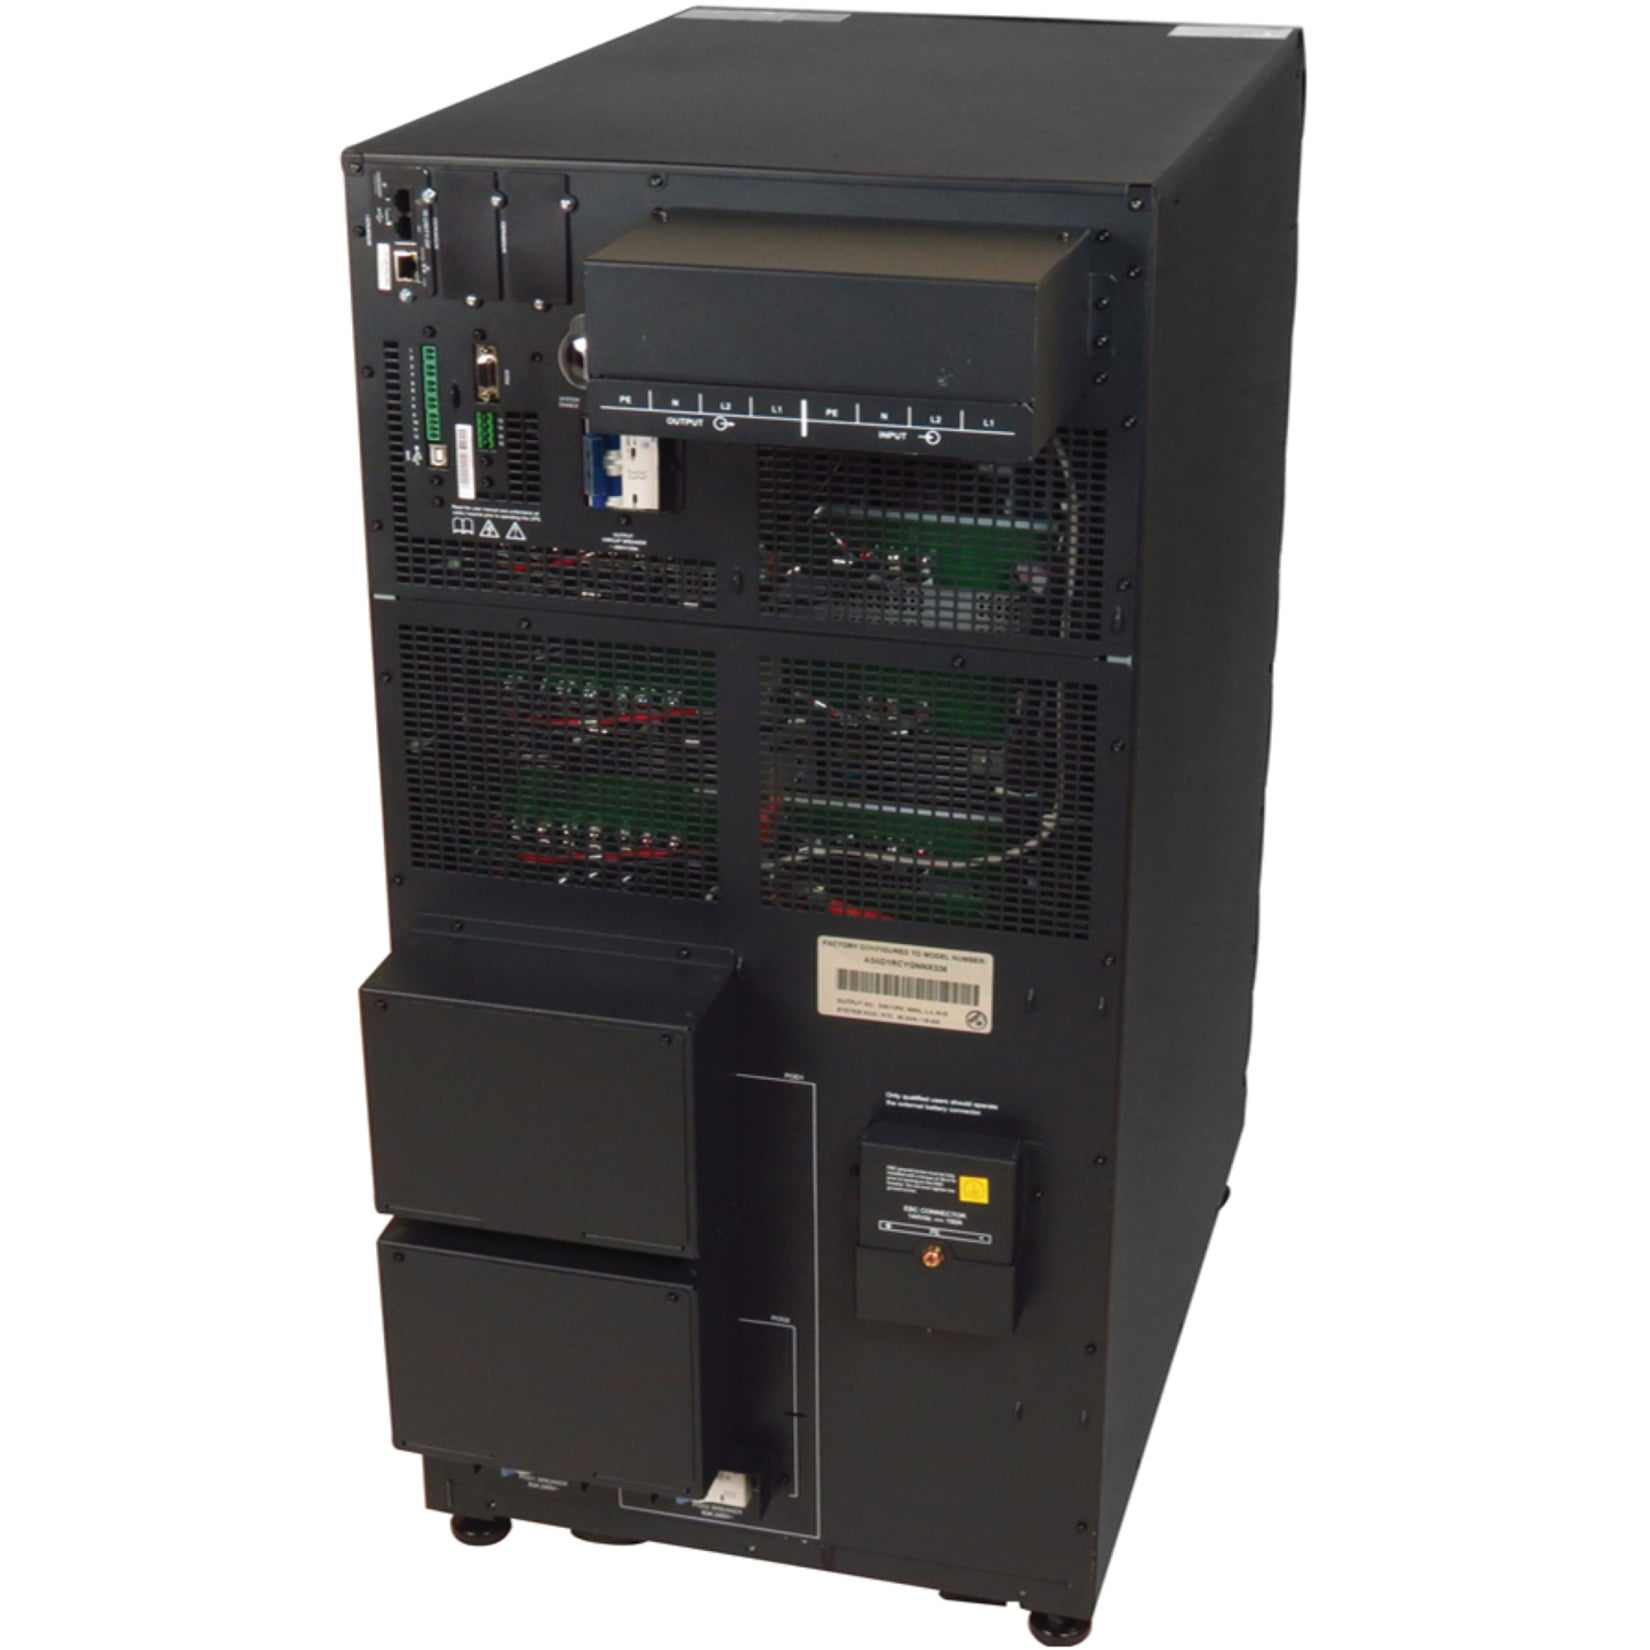 Liebert AS6C0NCWGNNXLKB APS 15kVA Scalable to 20kVA N+1 Double Conversion Online UPS, 15 Minute Backup, LCD Display